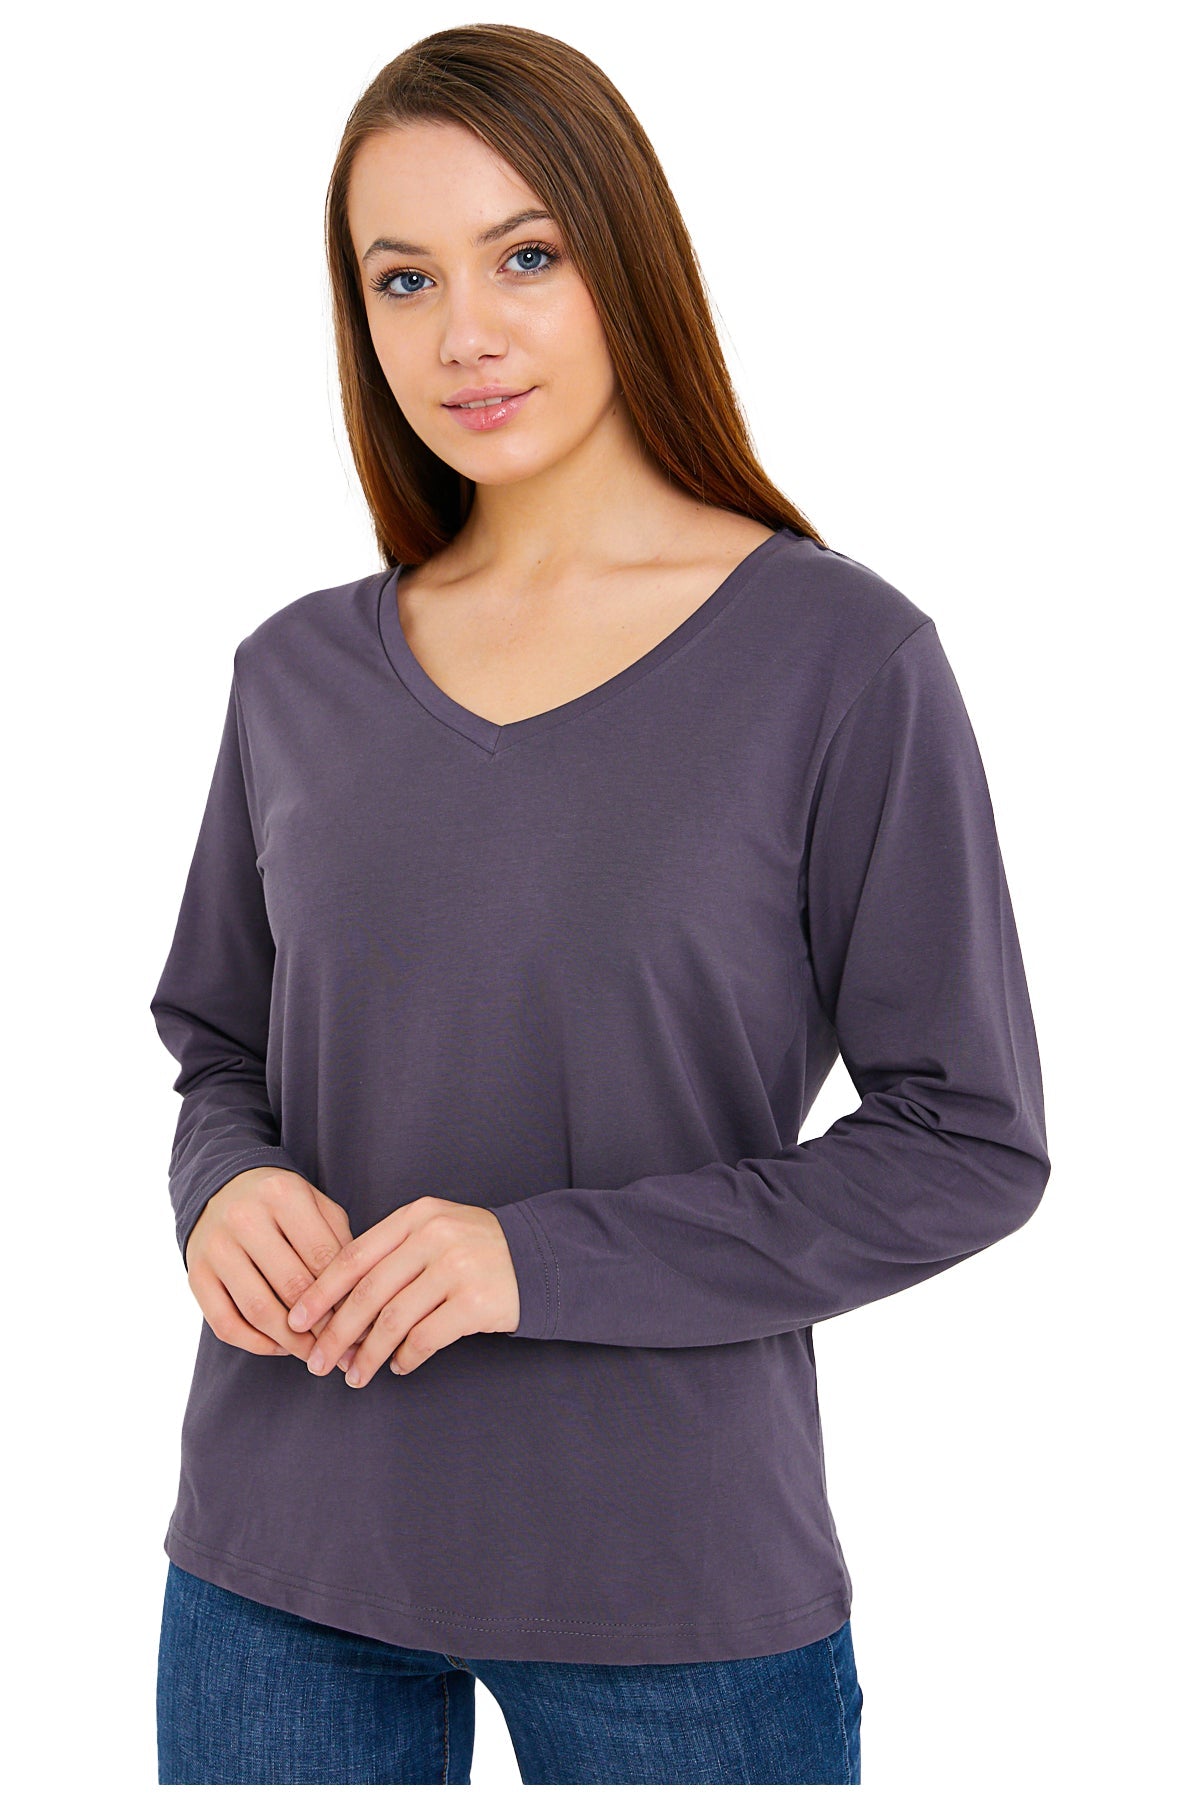 Long Sleeve V Neck T-Shirts for Women & Girls - Colorful Pima Cotton-135